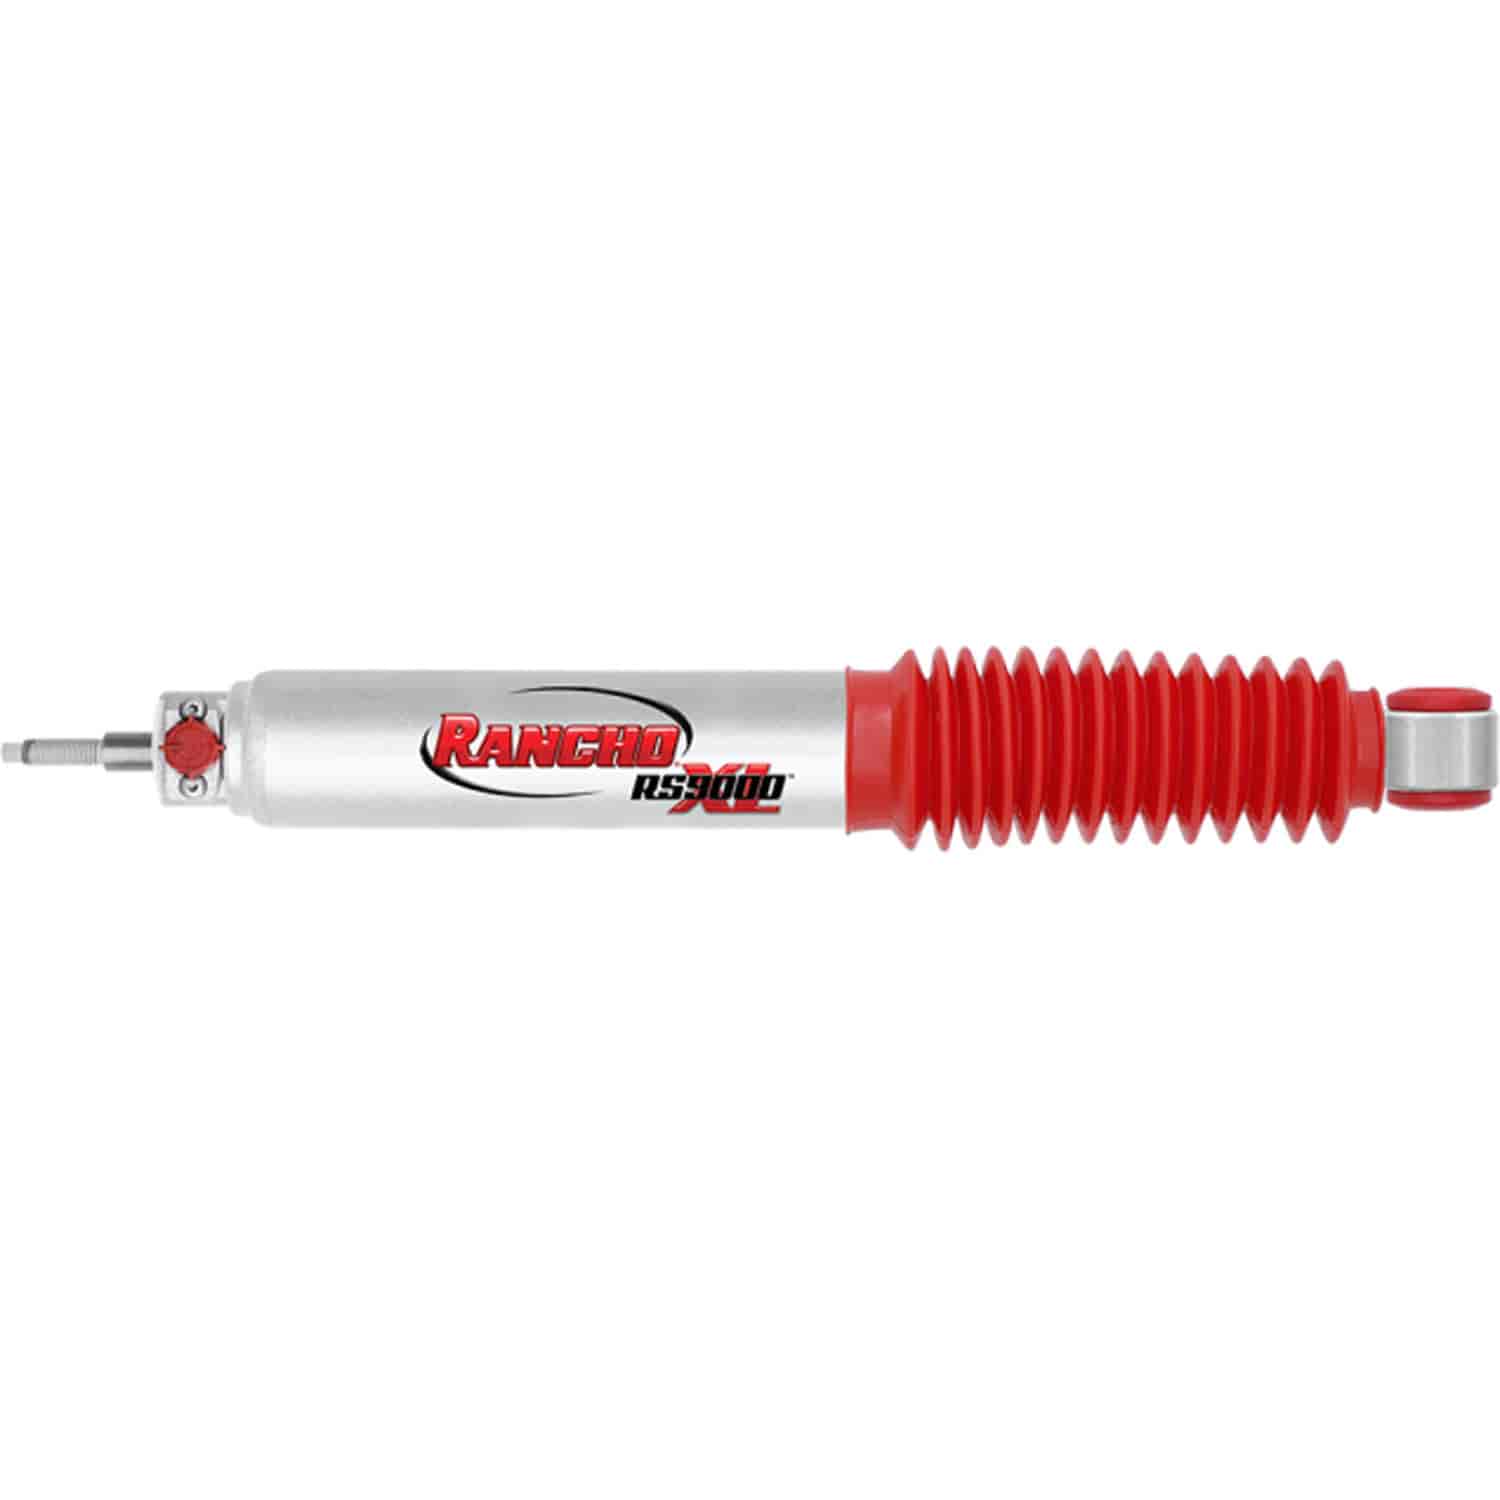 RS9000XL Rear Shock Absorber Fits for Nissan Commercial Vehicles